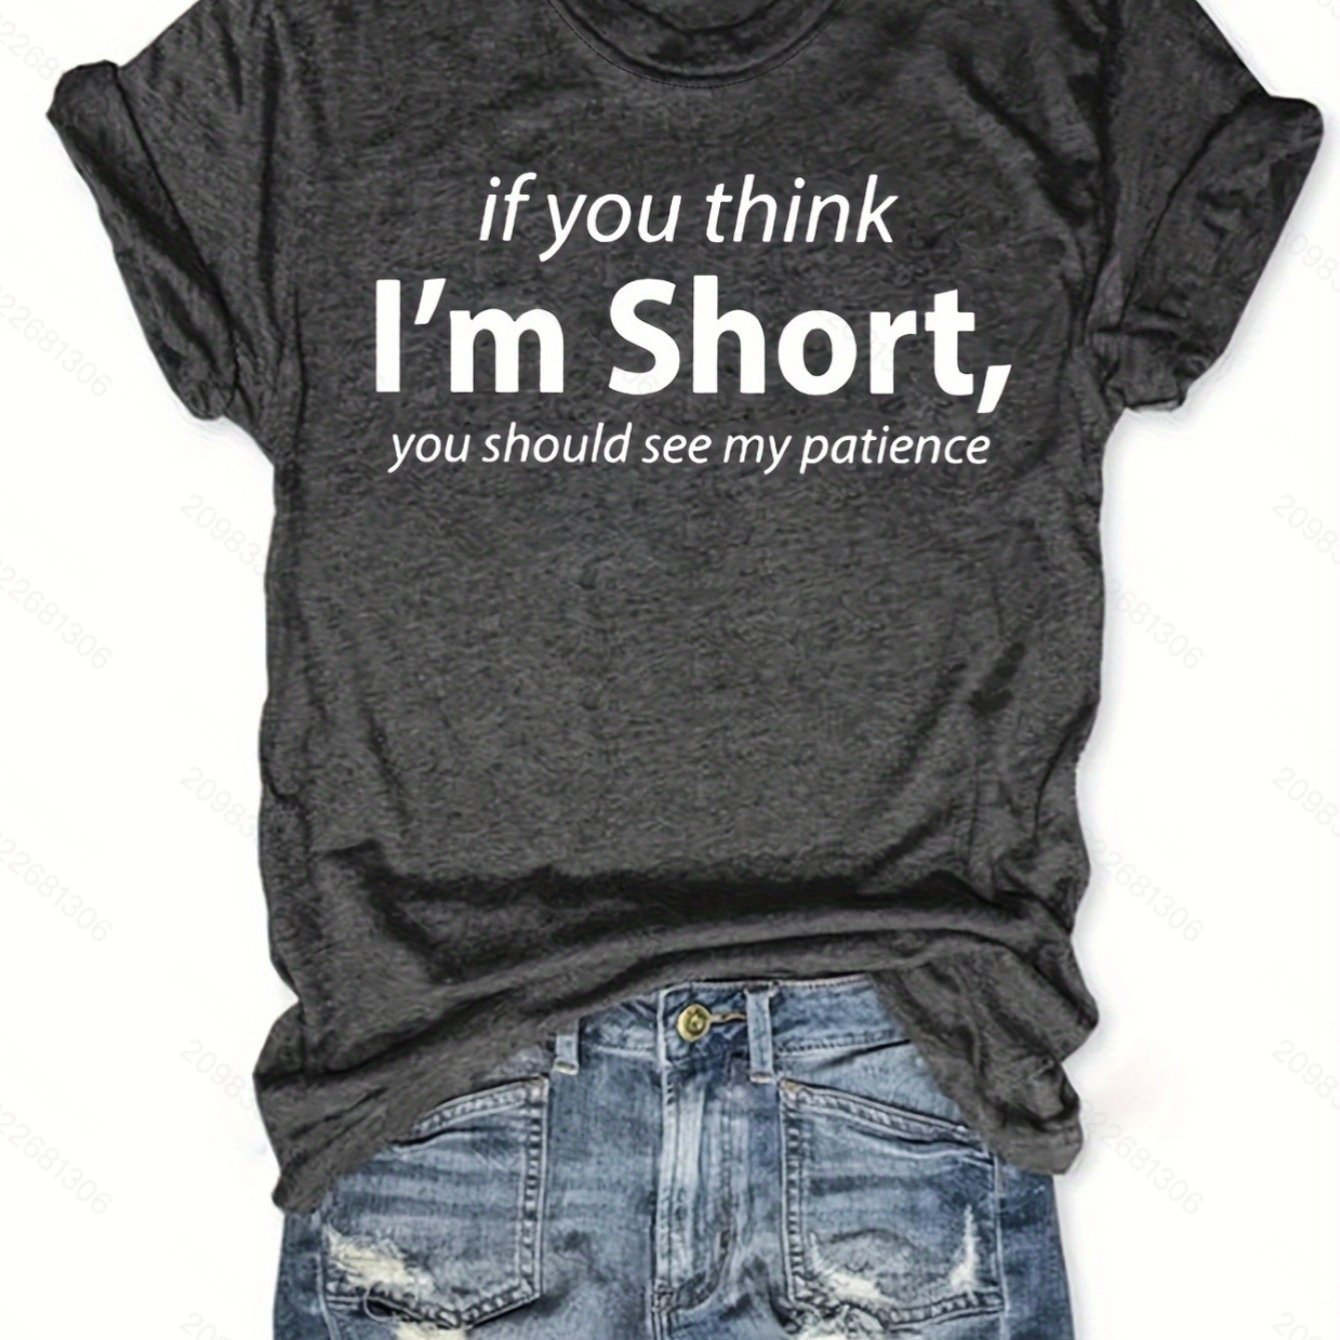 

I'm Short - Women's Chic Letter Print Tee - Comfy, Casual Short Sleeve Crew Neck T-shirt For Everyday Wear & Stylish Layering